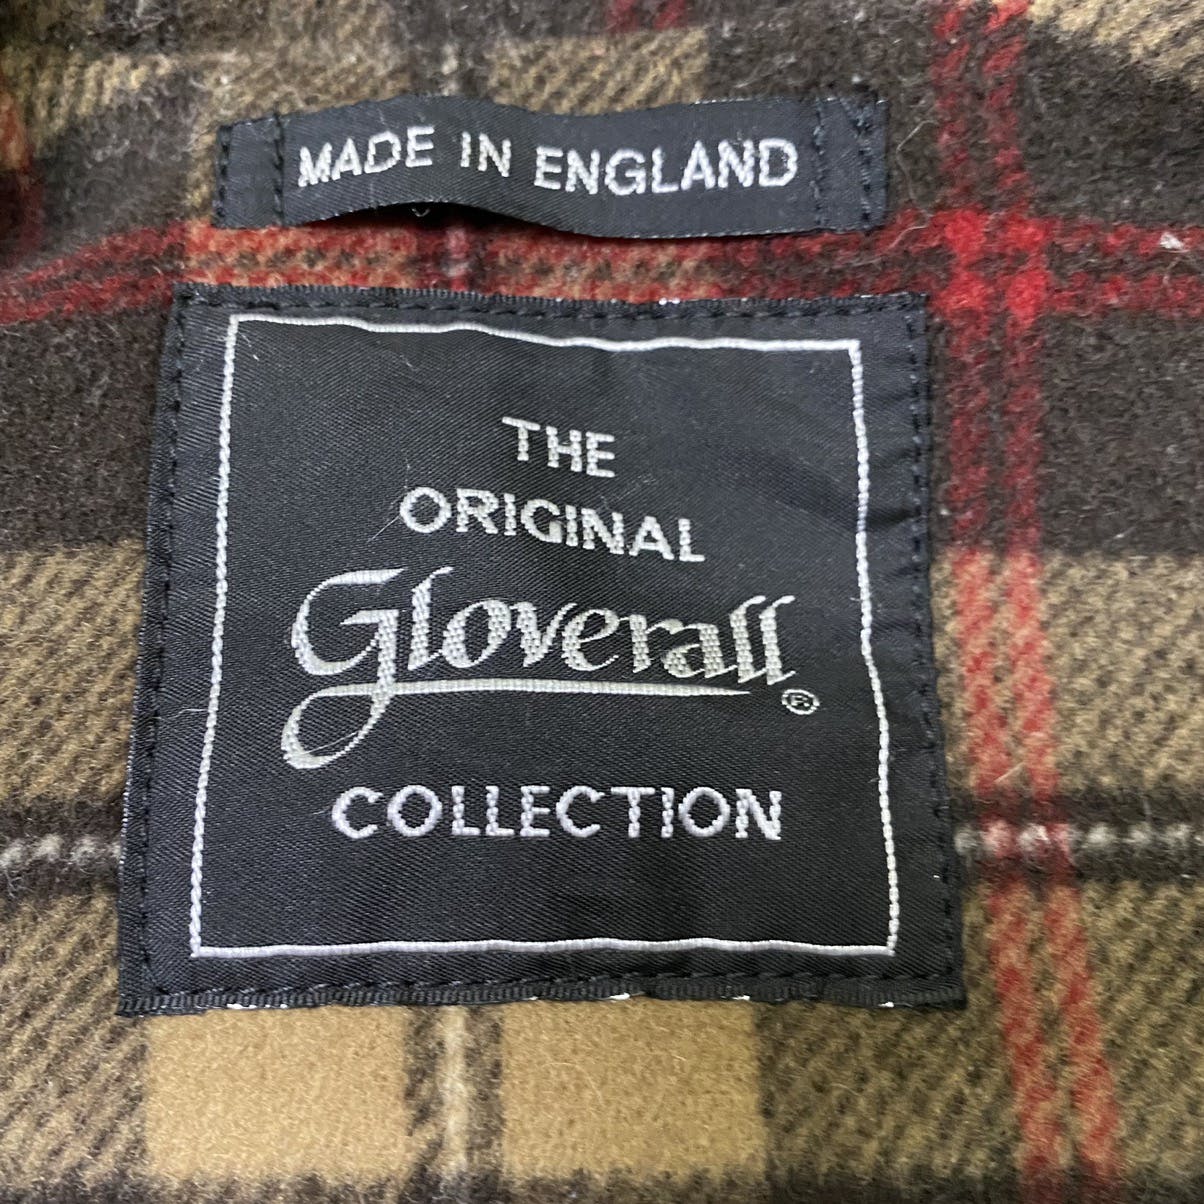 Gloverall morris duffle wool parka hoodie made in england - 7